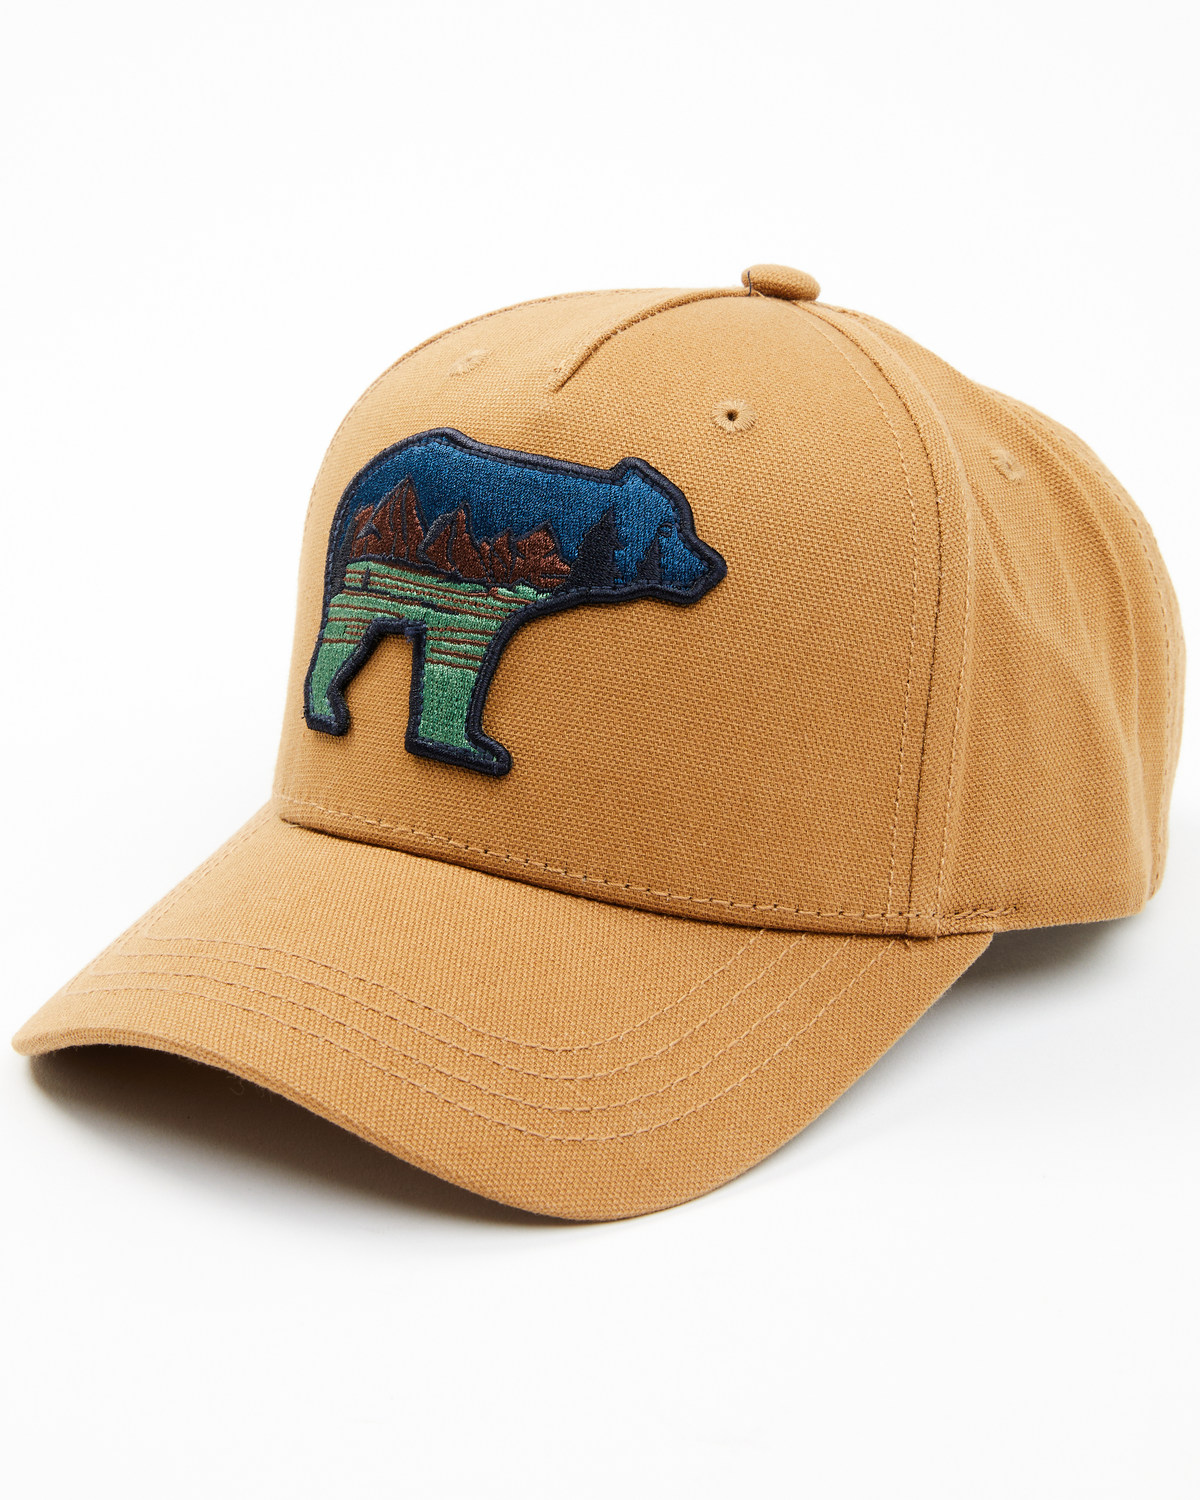 Brothers and Sons Men's Bear Scene Patch Ball Cap